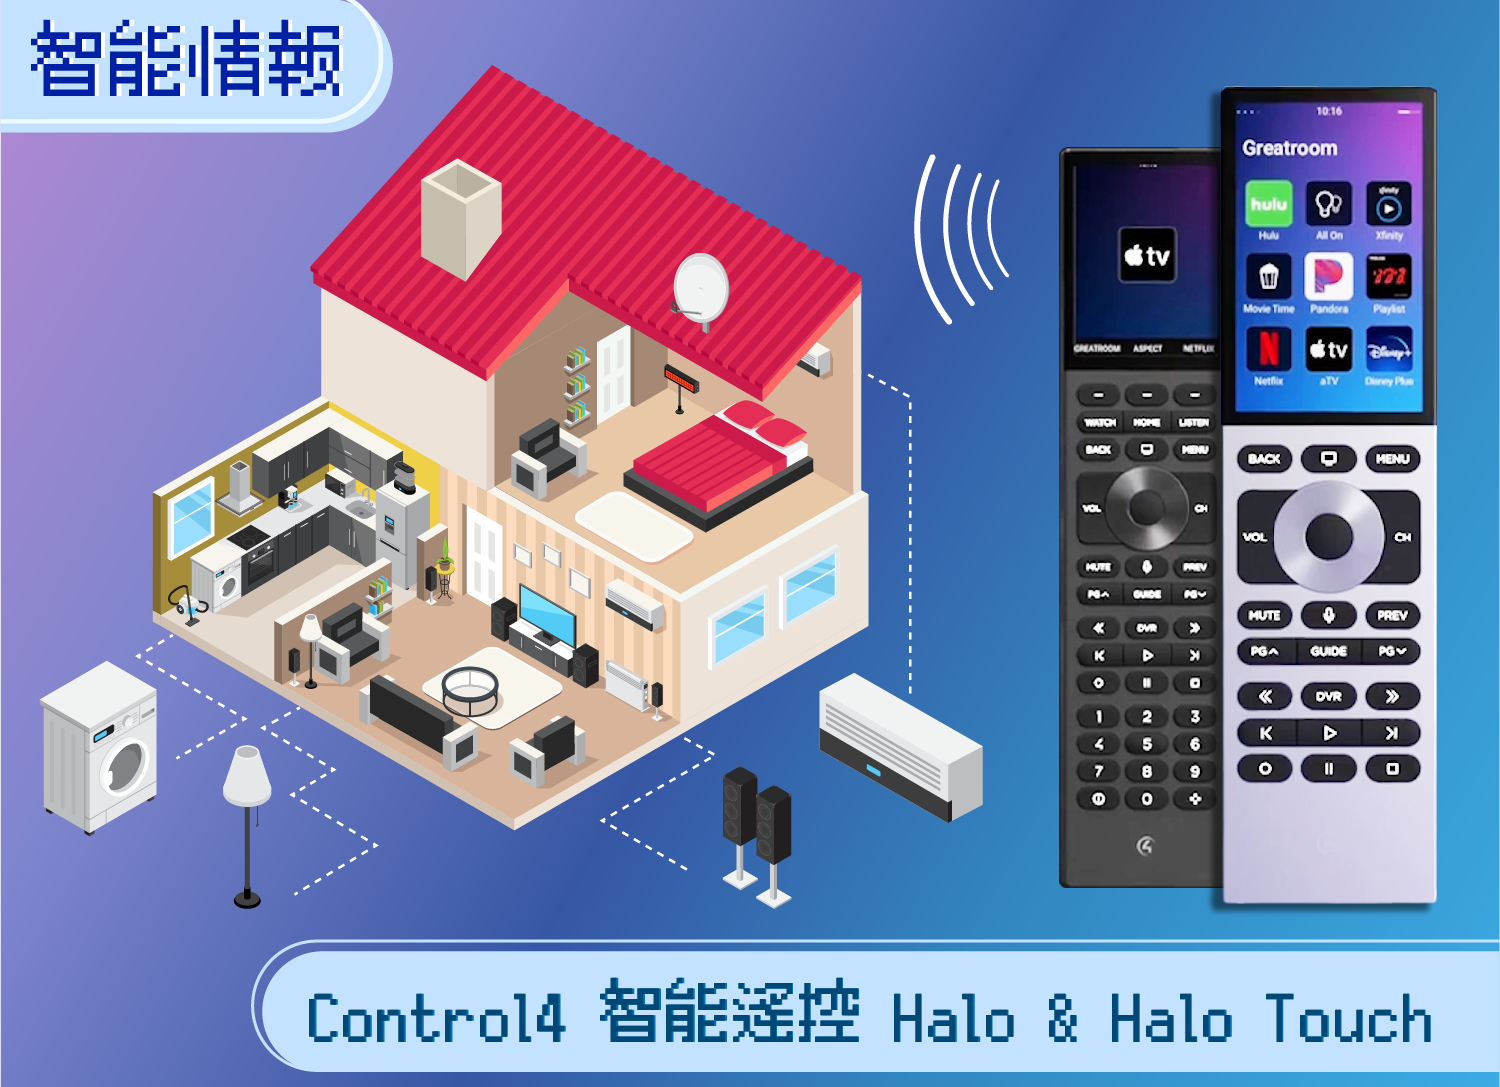 Control4 智能遙控 Halo & Halo Touch 詳細介紹  改良UI 兼容WiFi 2.4 & 5GHz